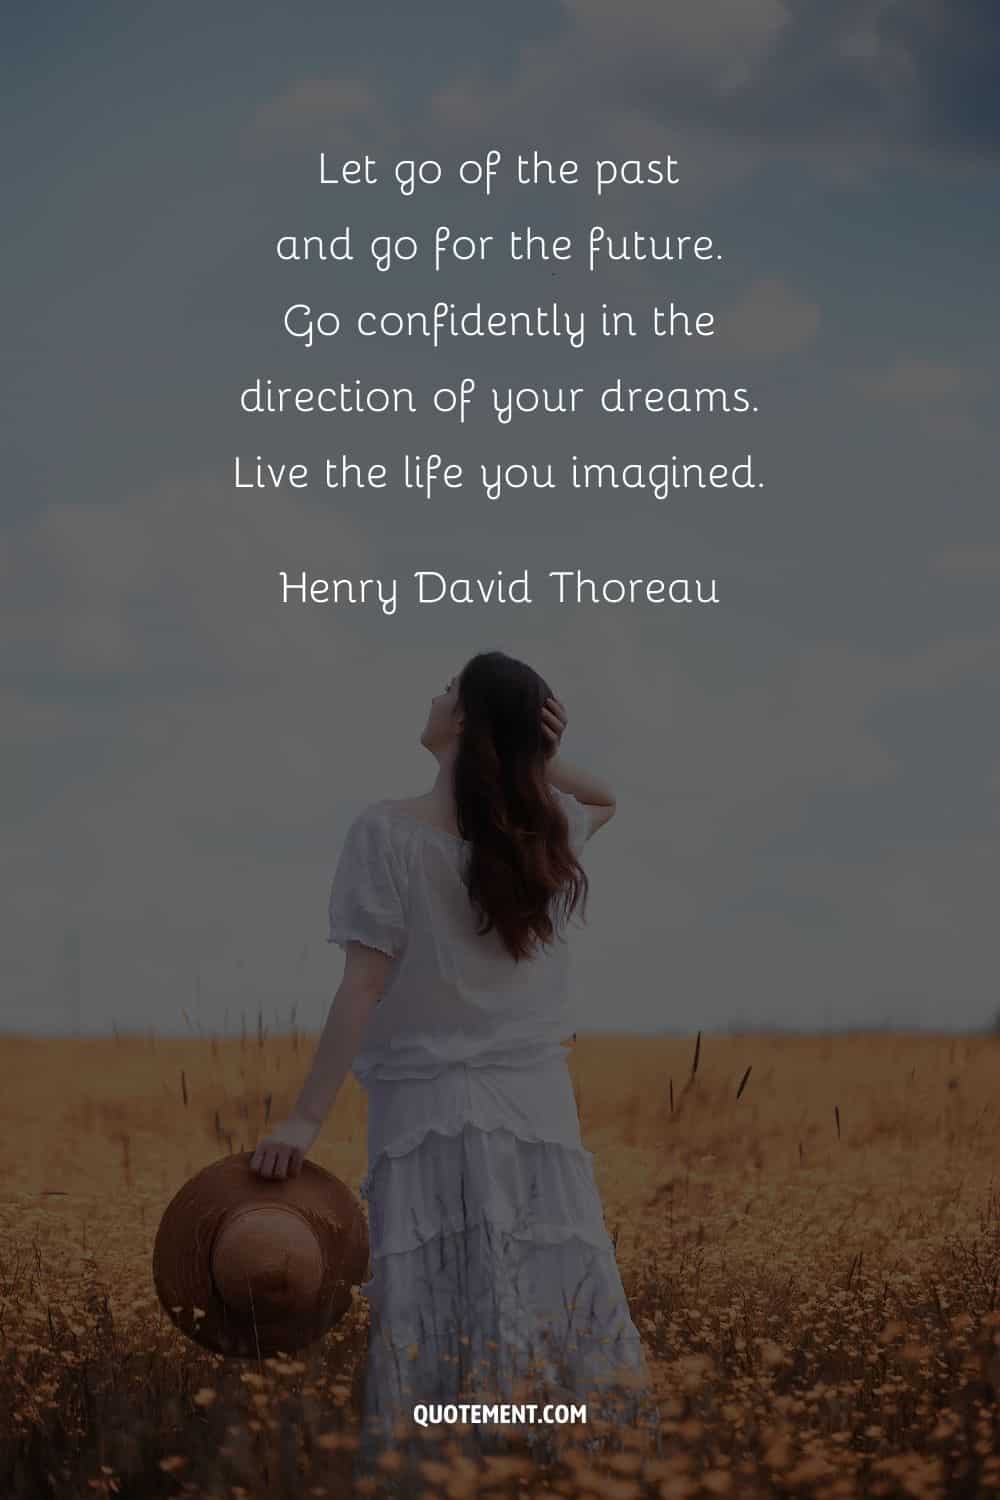 Let go of the past and go for the future. Go confidently in the direction of your dreams. Live the life you imagined. — Henry David Thoreau